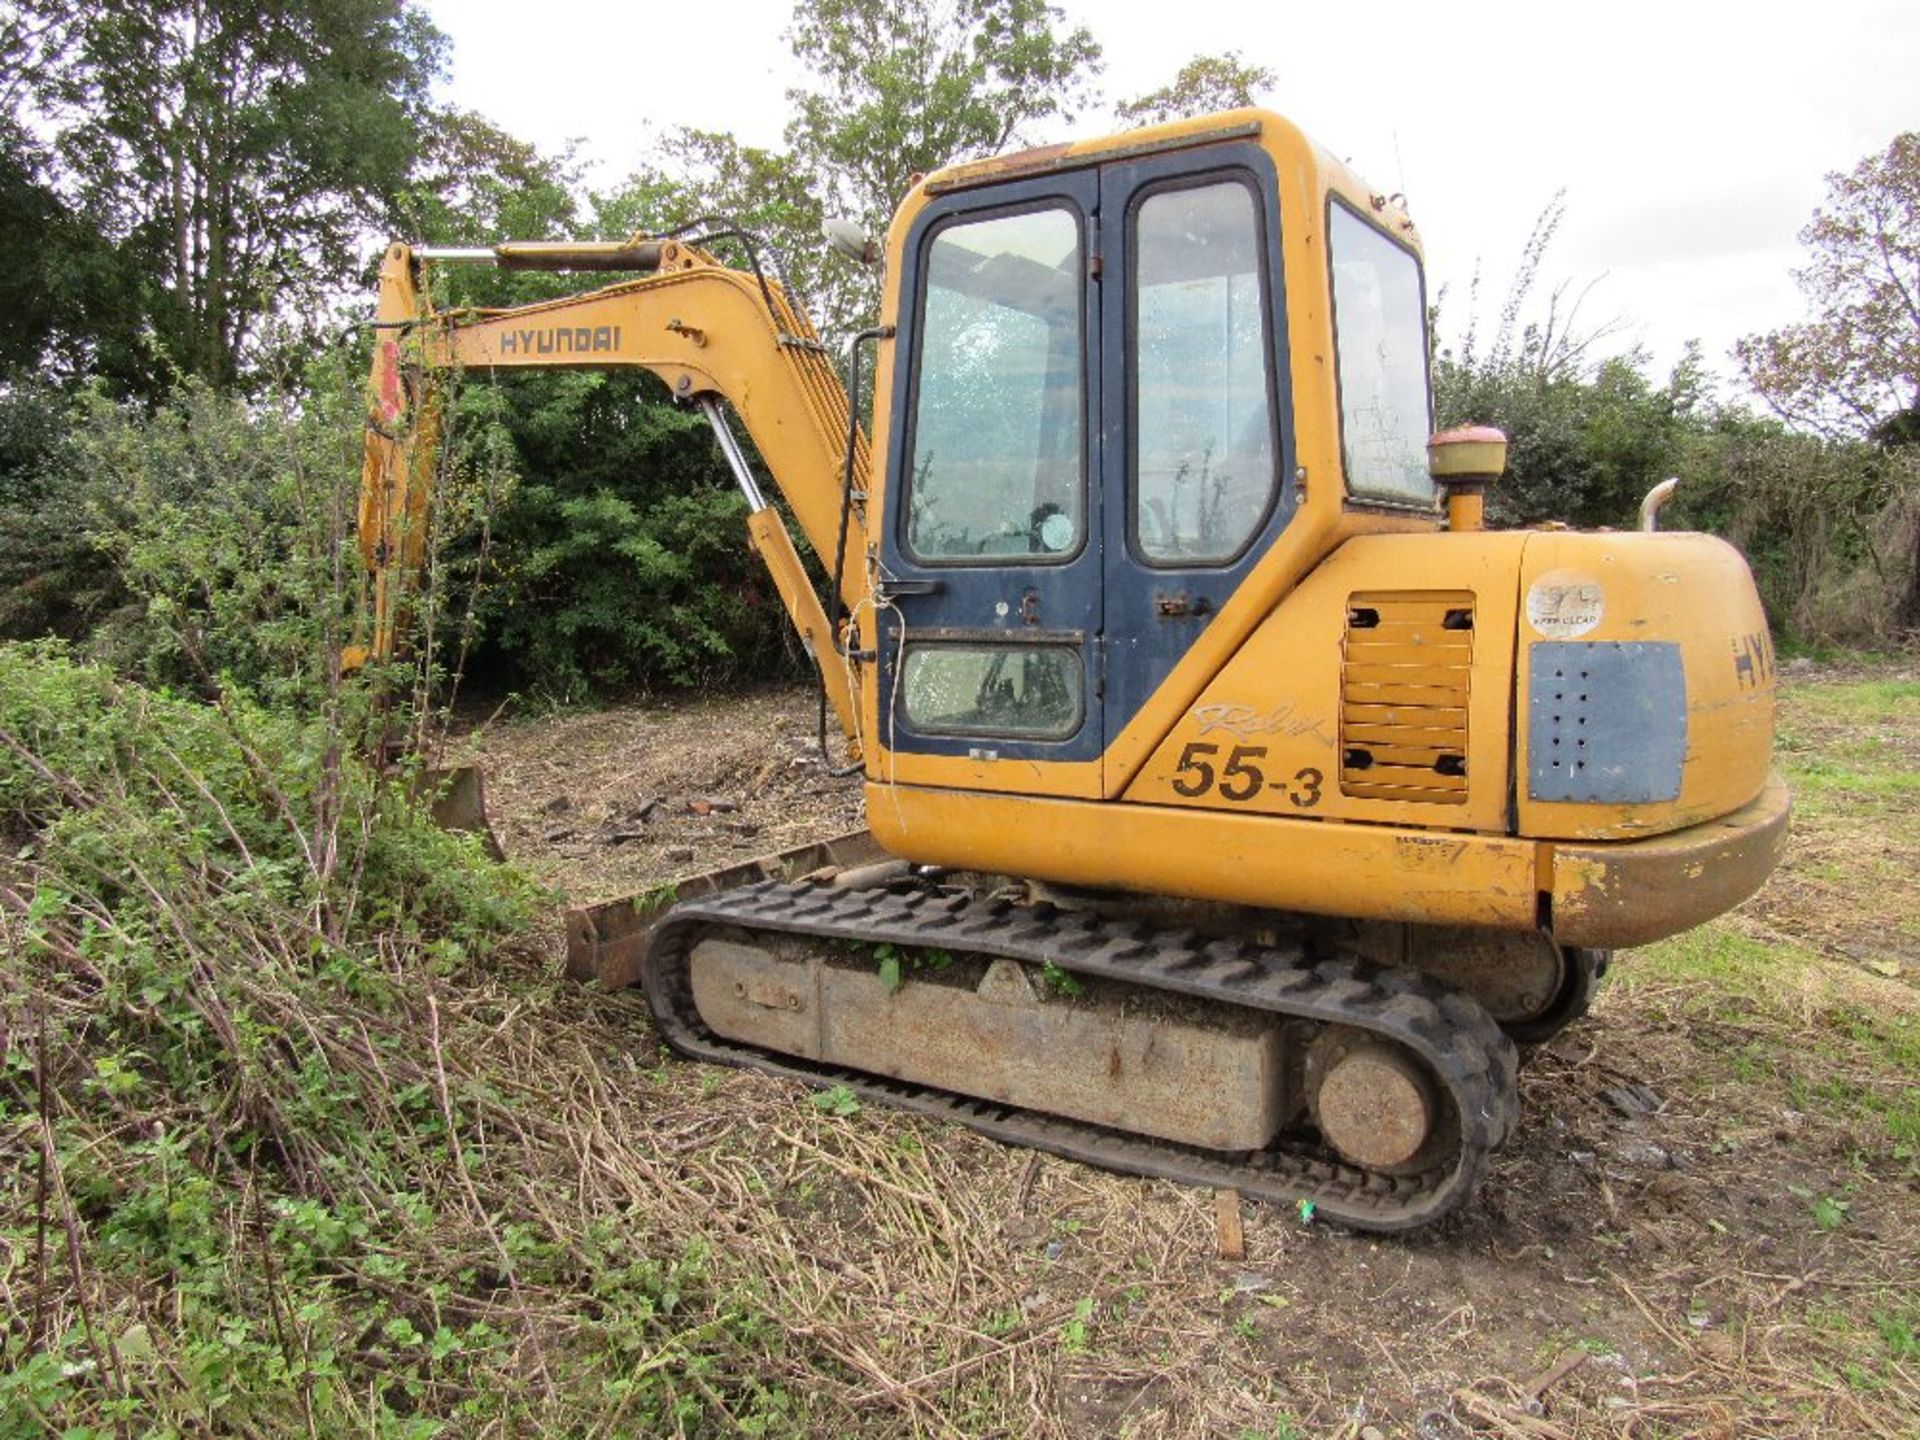 Hyundai 55-3 excavator comes with 3ft ditching bucket, 9" trench bucket,